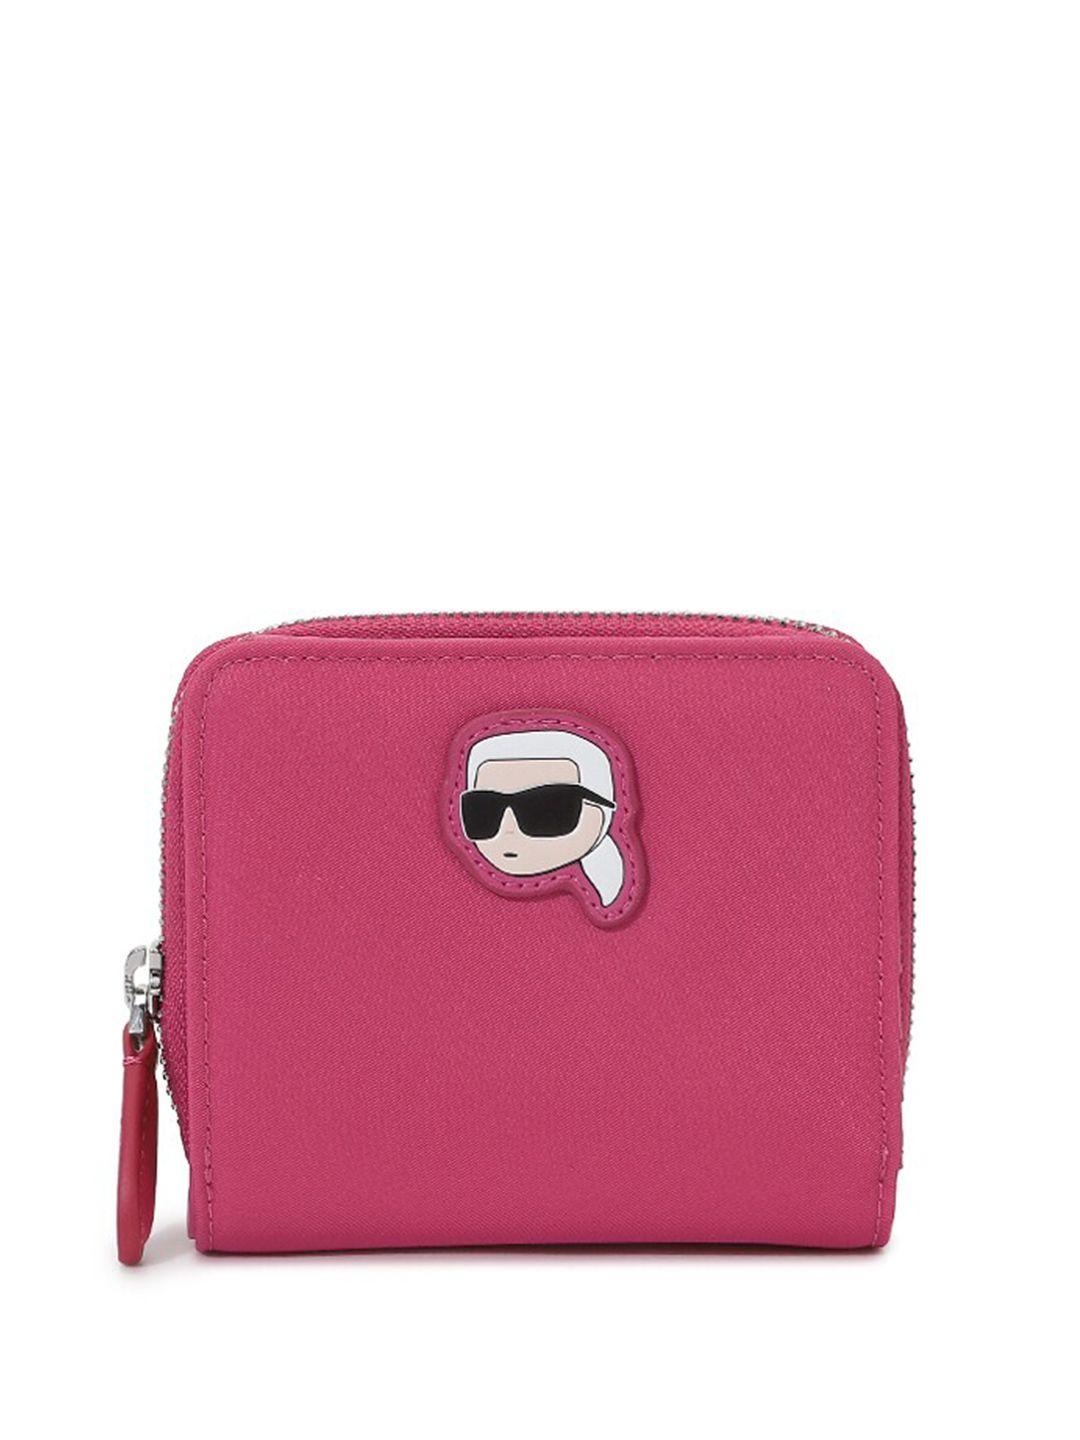 karl-lagerfeld-women-graphic-printed-leather-two-fold-wallet